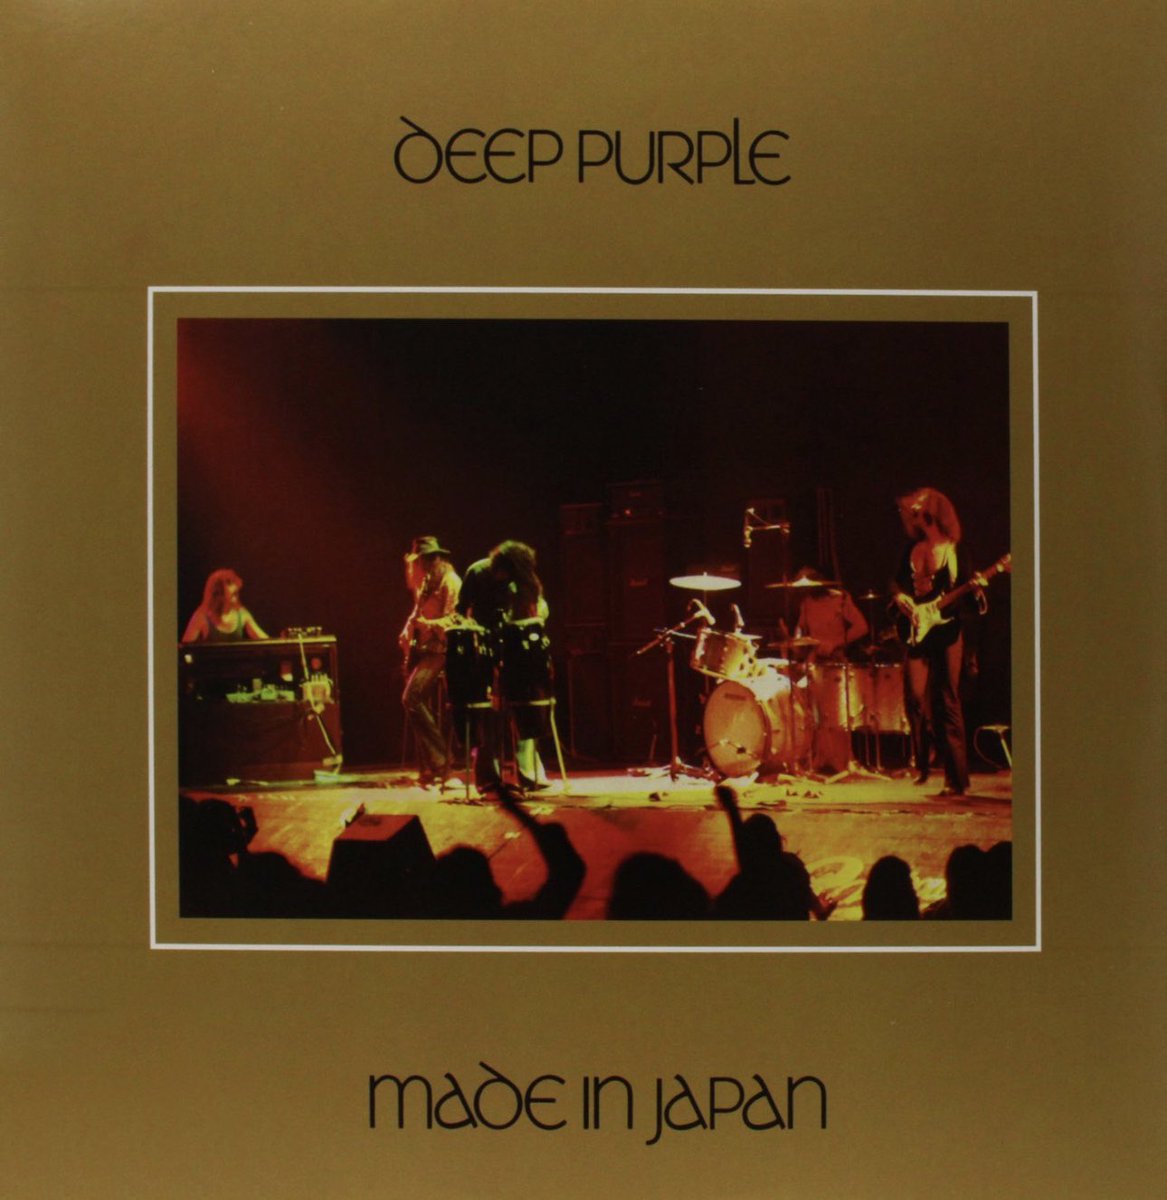 7 tracks, 2 discs, 4 sides, 76 minutes and 44 seconds of magic disguised as music.
This, and more, is #MadeinJapan by #DeepPurple.
Recorded between #Osaka and #Tokyo on August 15-16-17, 1972, curiously, it has a photo taken at the #BrixtonAcademy as cover.
@pilloledirock